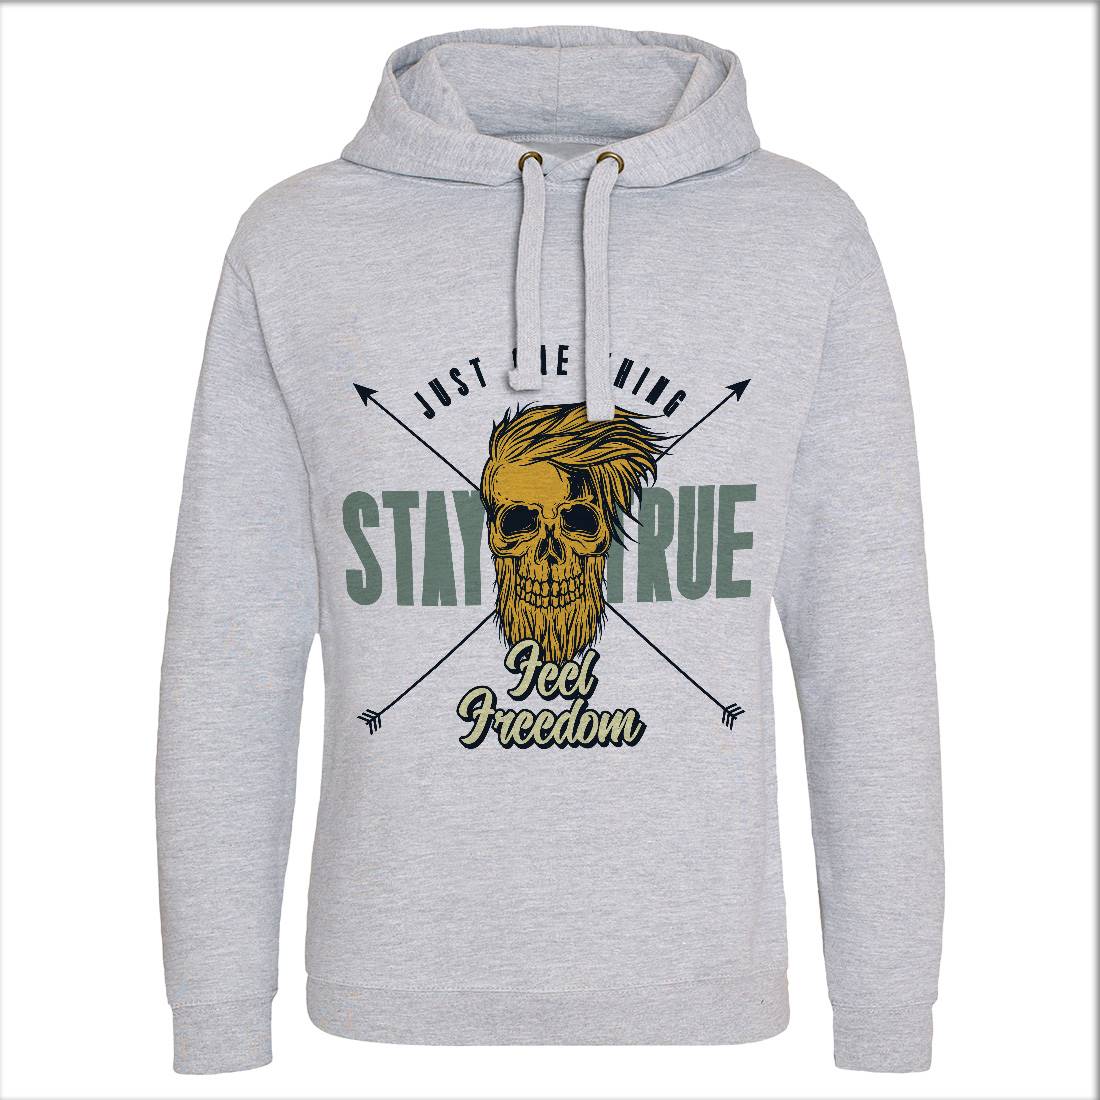 Stay True Mens Hoodie Without Pocket Barber C851